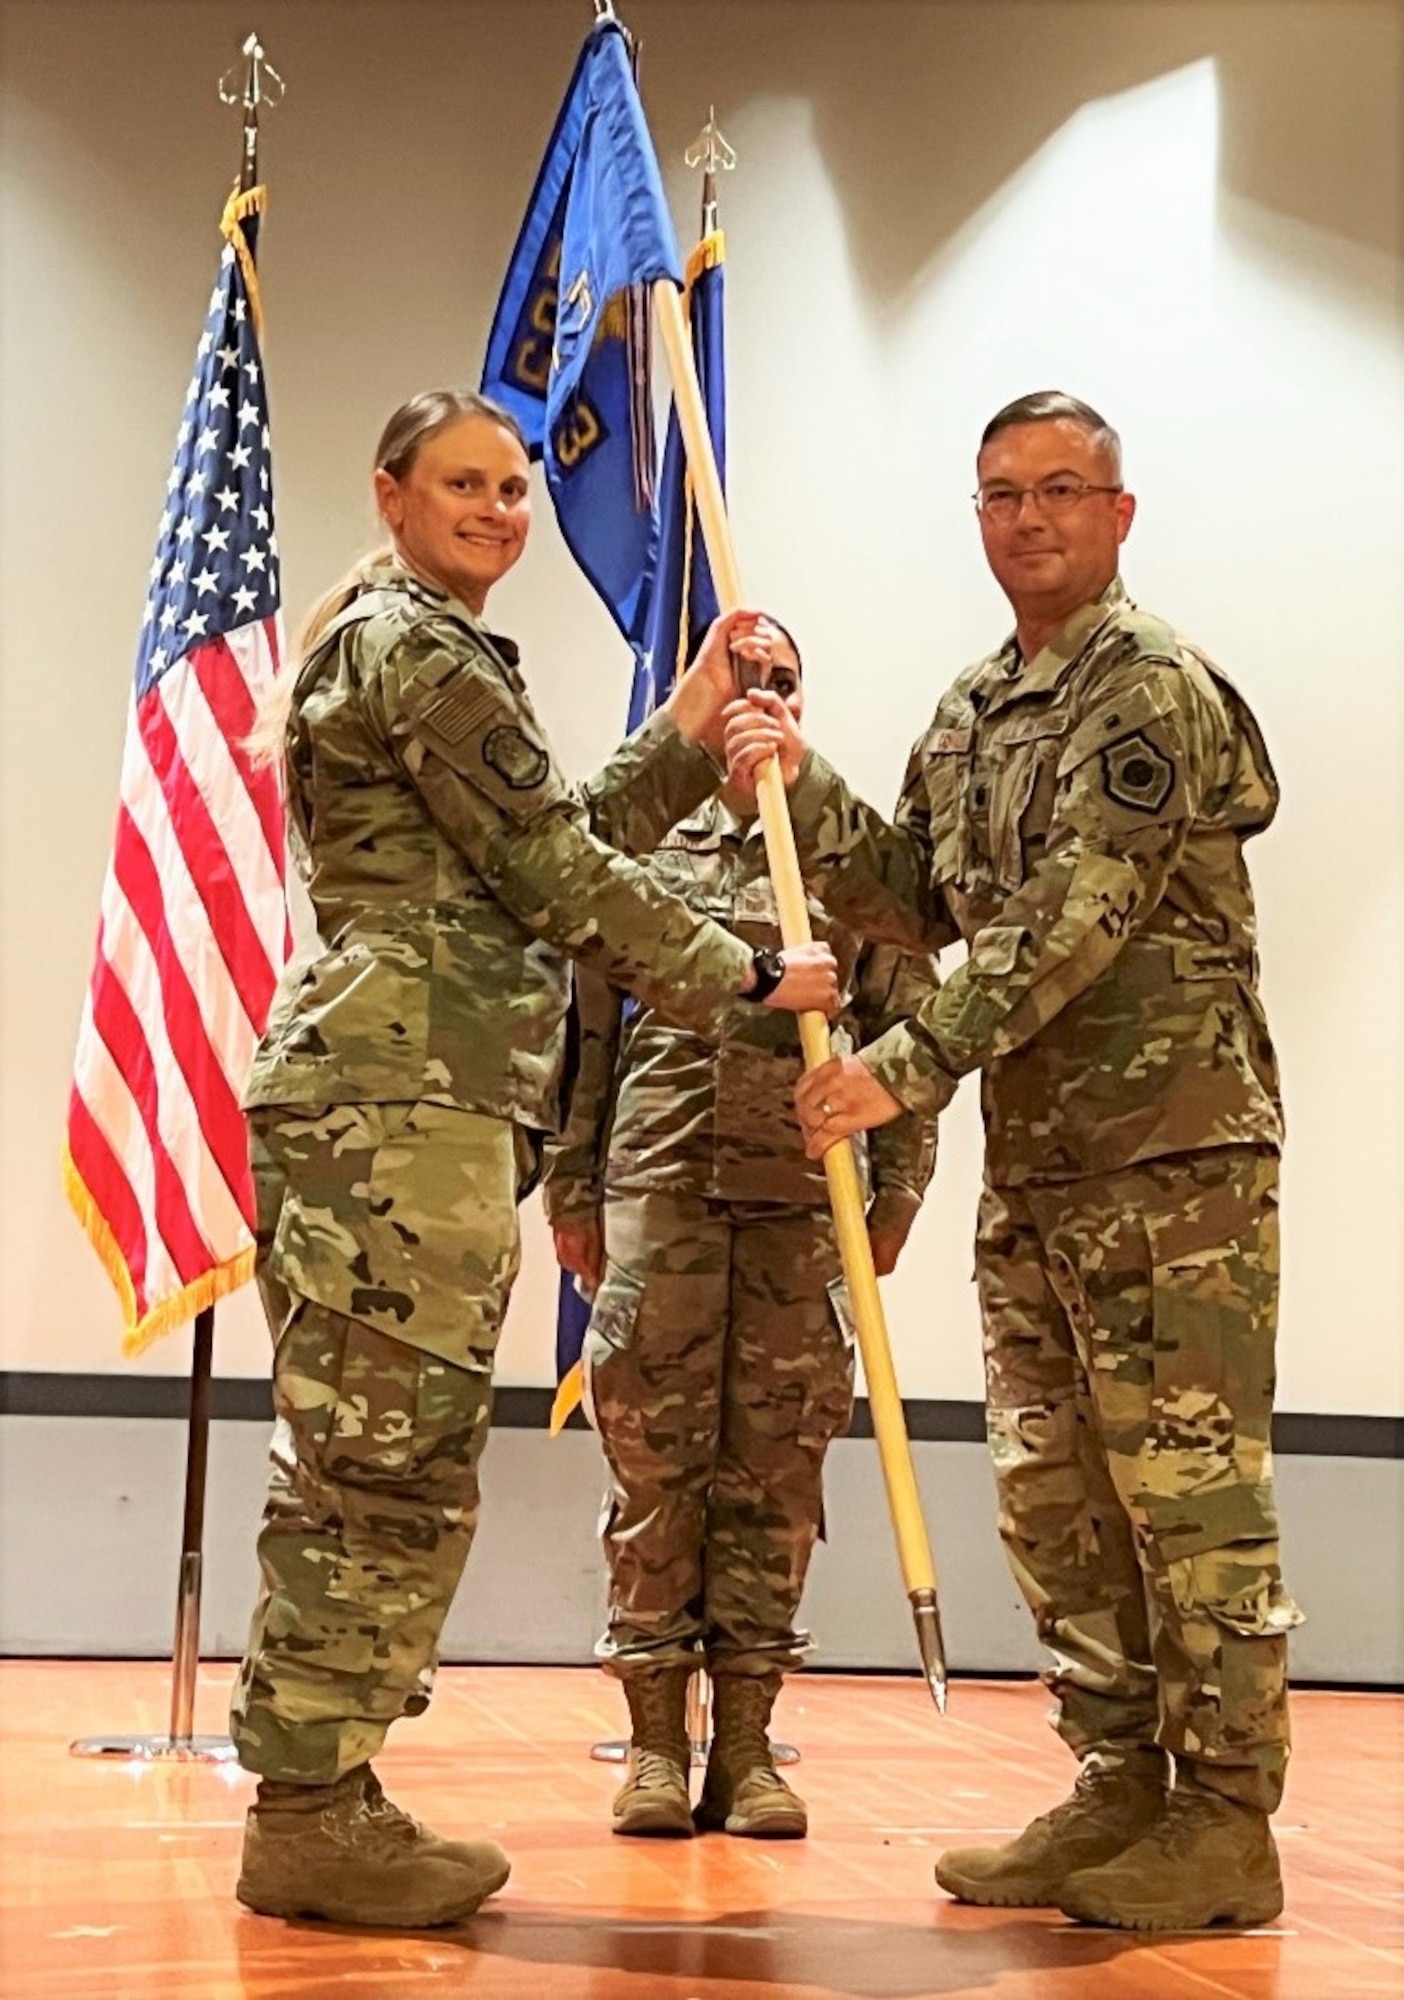 photo of three uniformed US Air Force Airmen standing on a stage, two Airmen in the forefront are both holding a unit flag while third Airman stands in background at attention